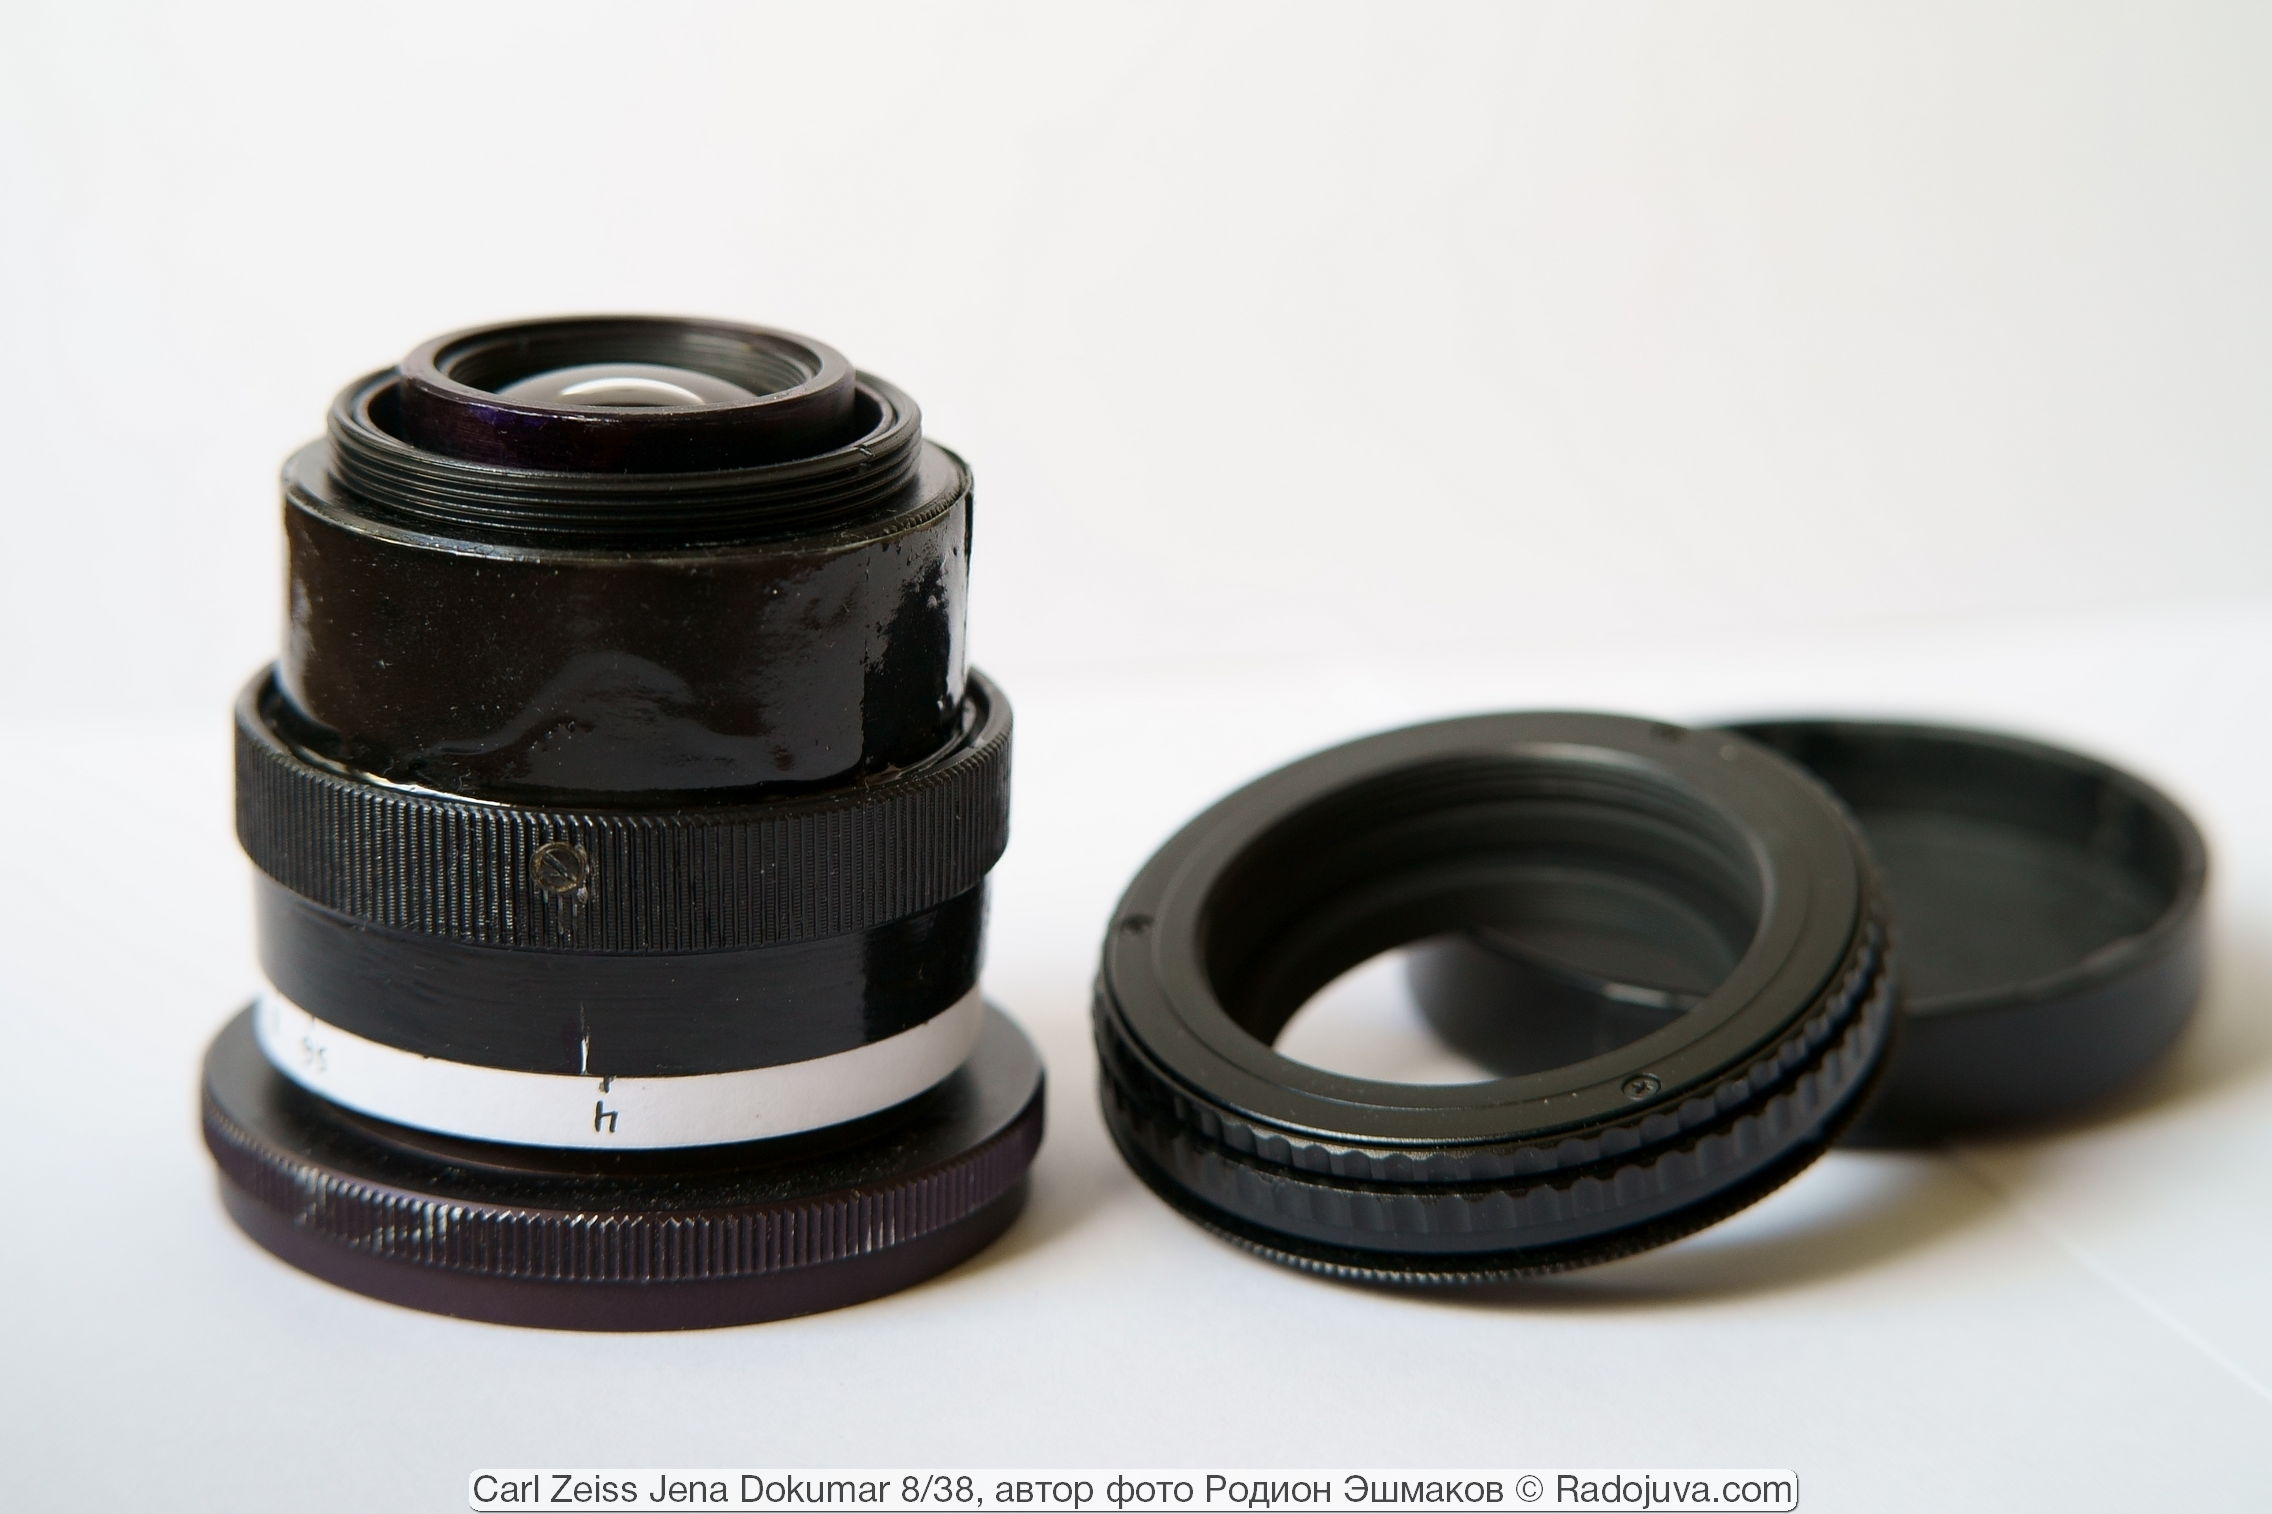 Reproduction Carl Zeiss Jena Dokumar 8/38, adapted for mirrorless 